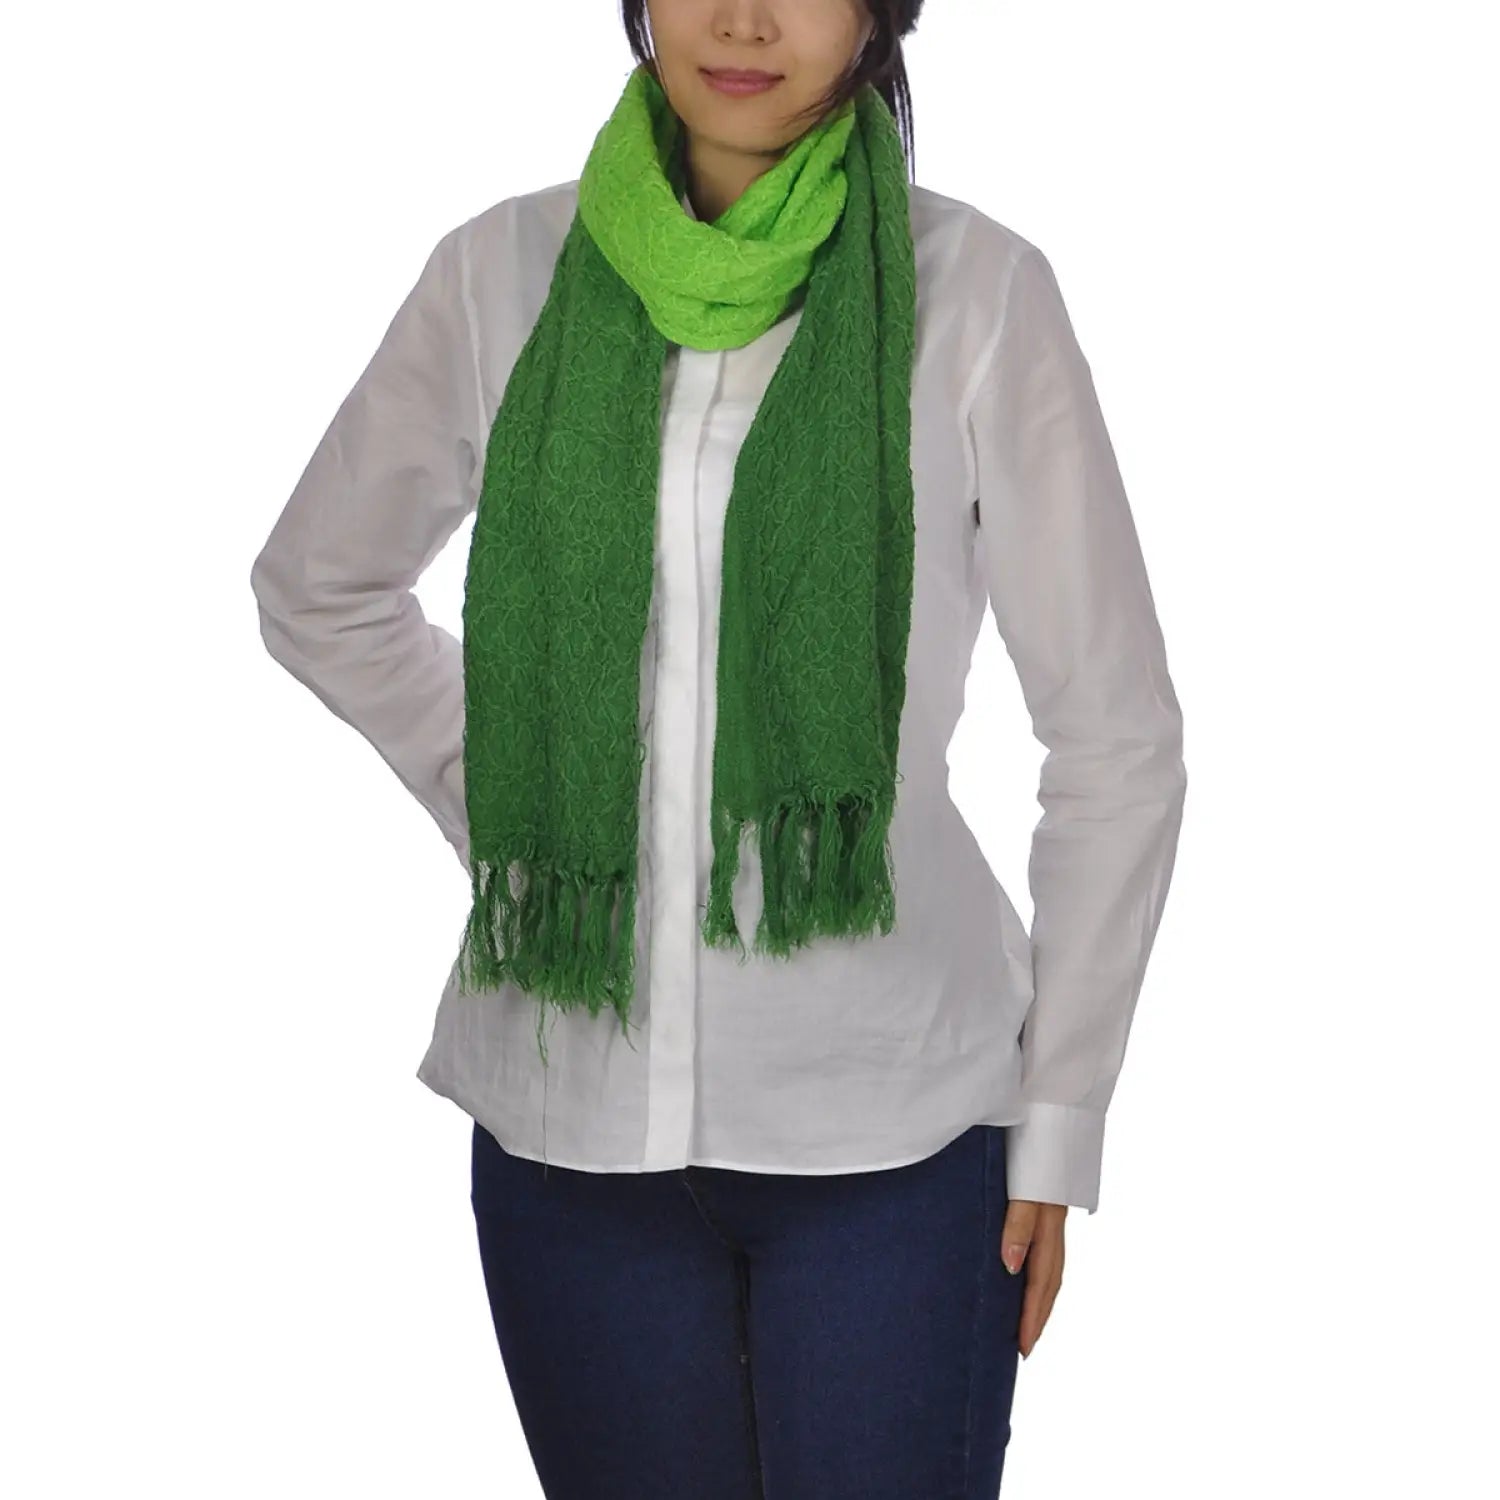 Woman wearing a green embroidered dip dye scarf.